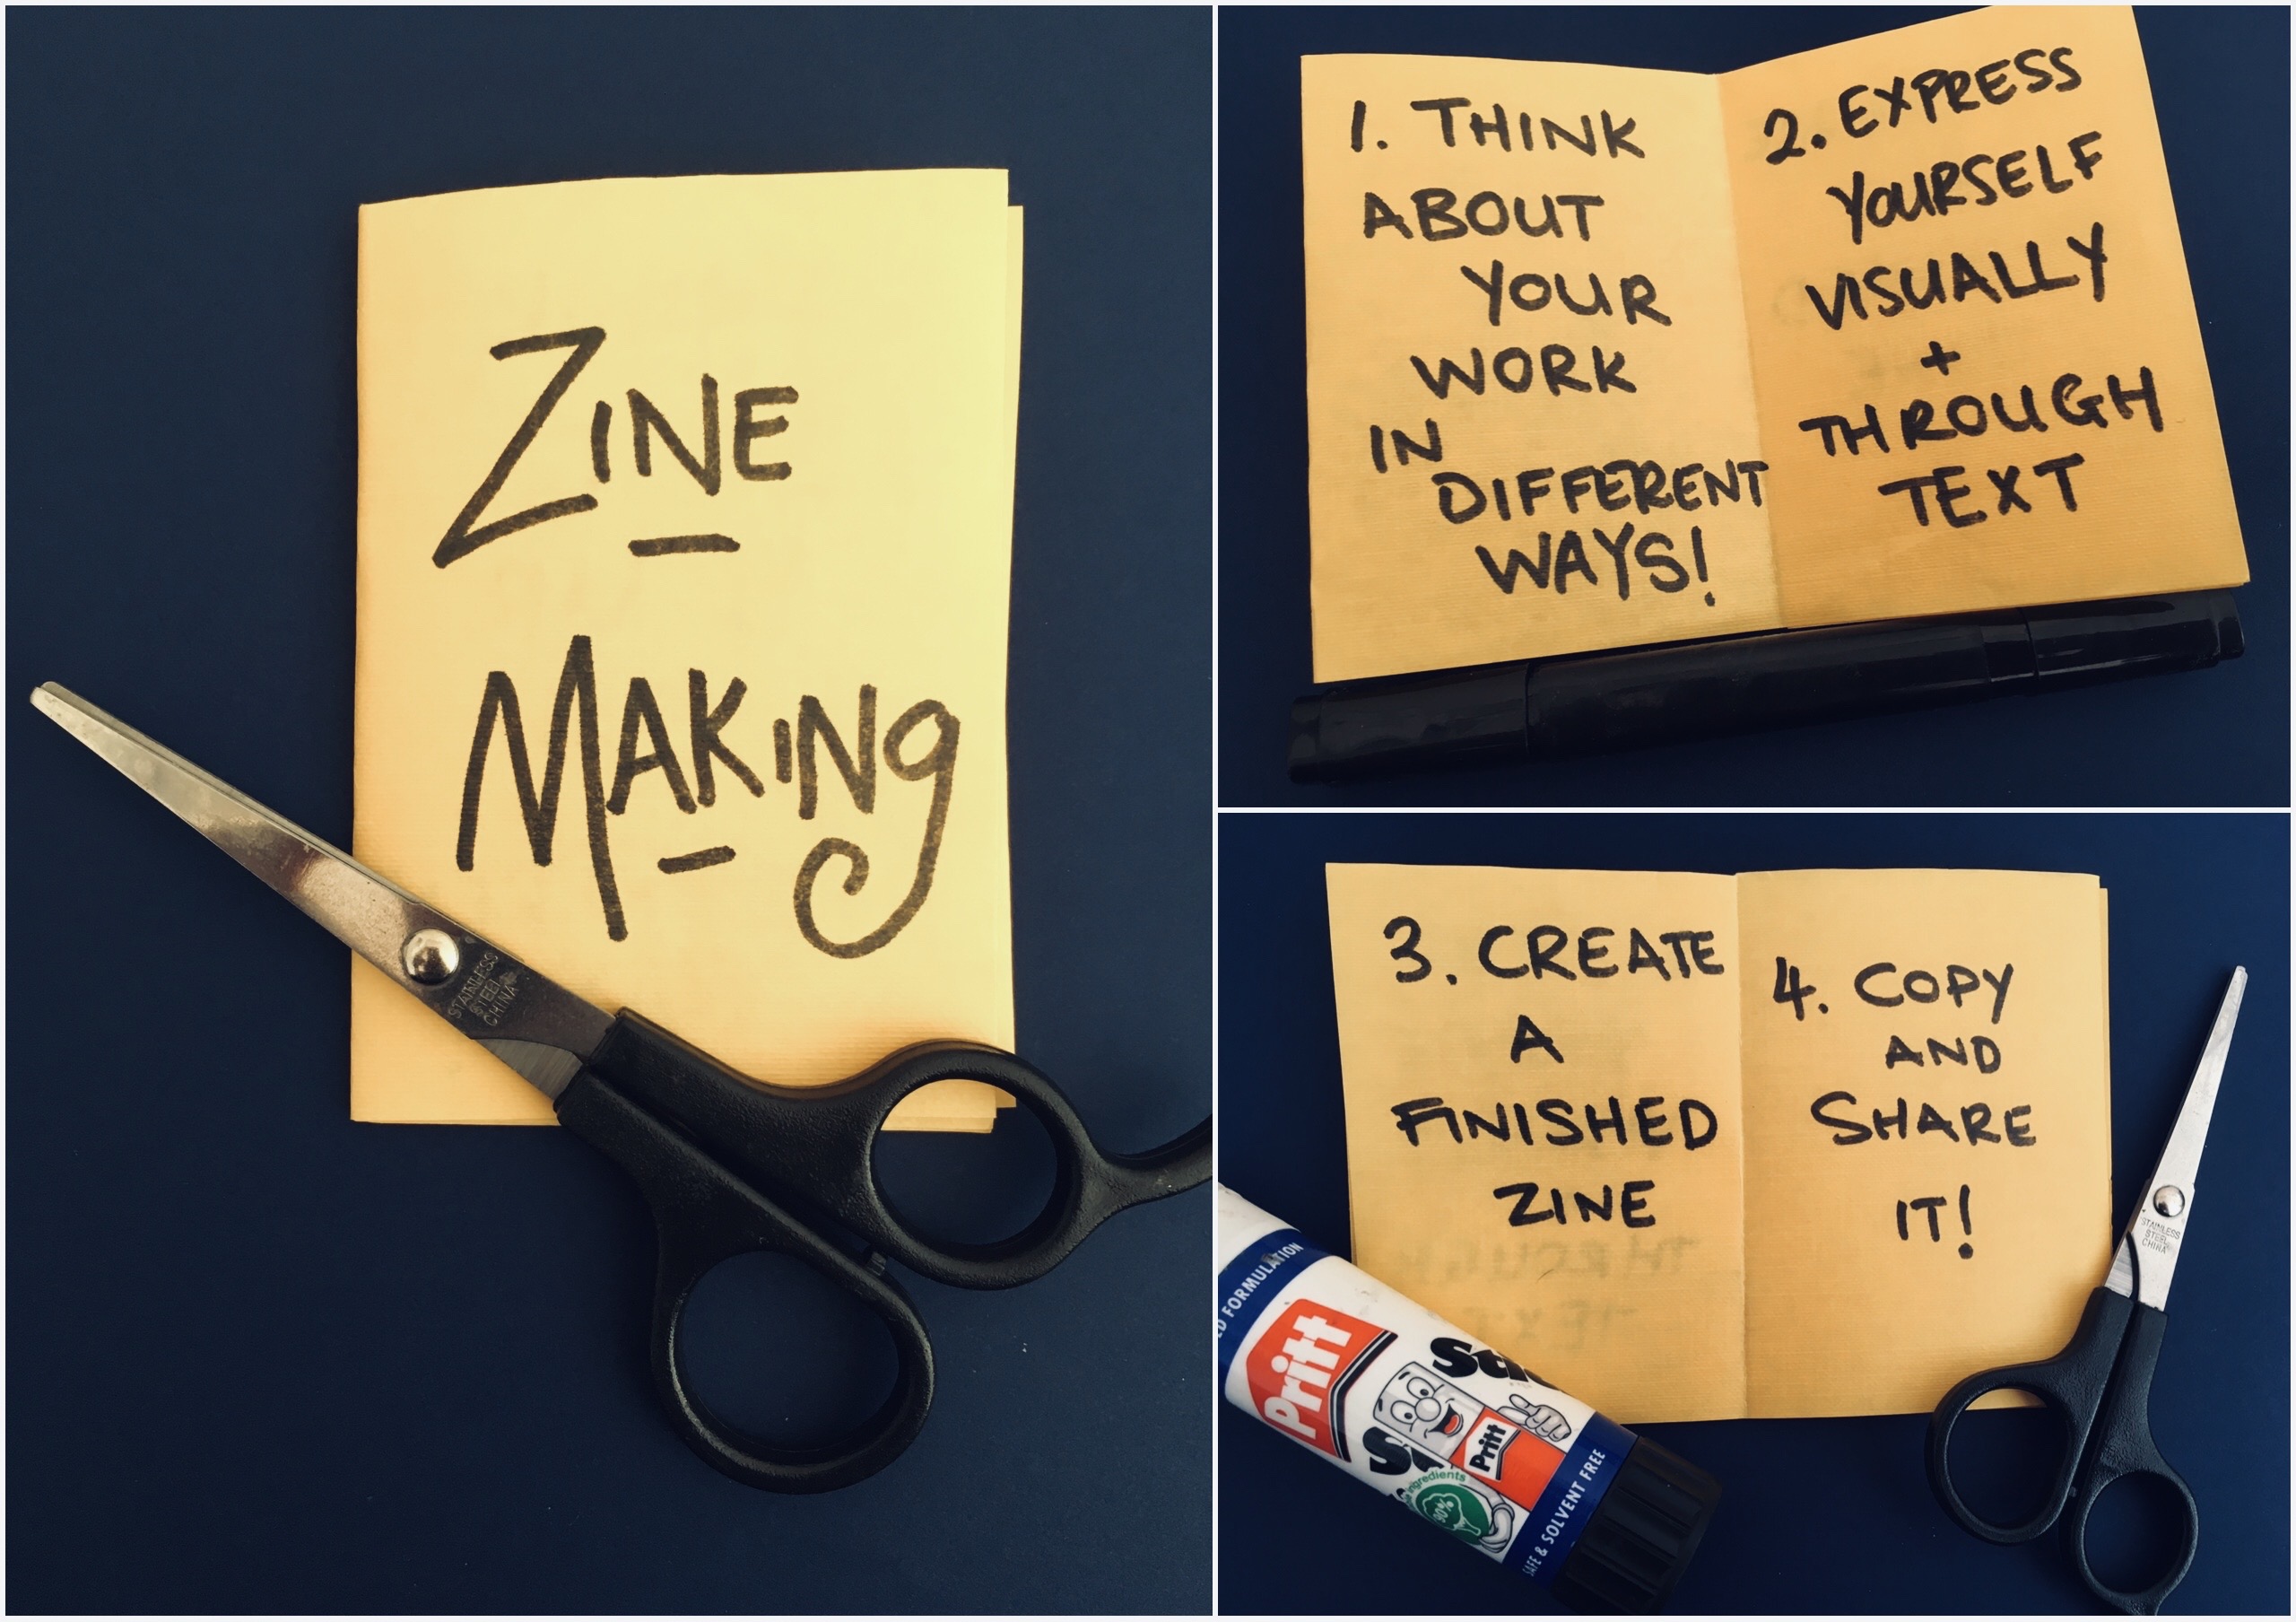 Picture shows a zine with the title "Zine Making"